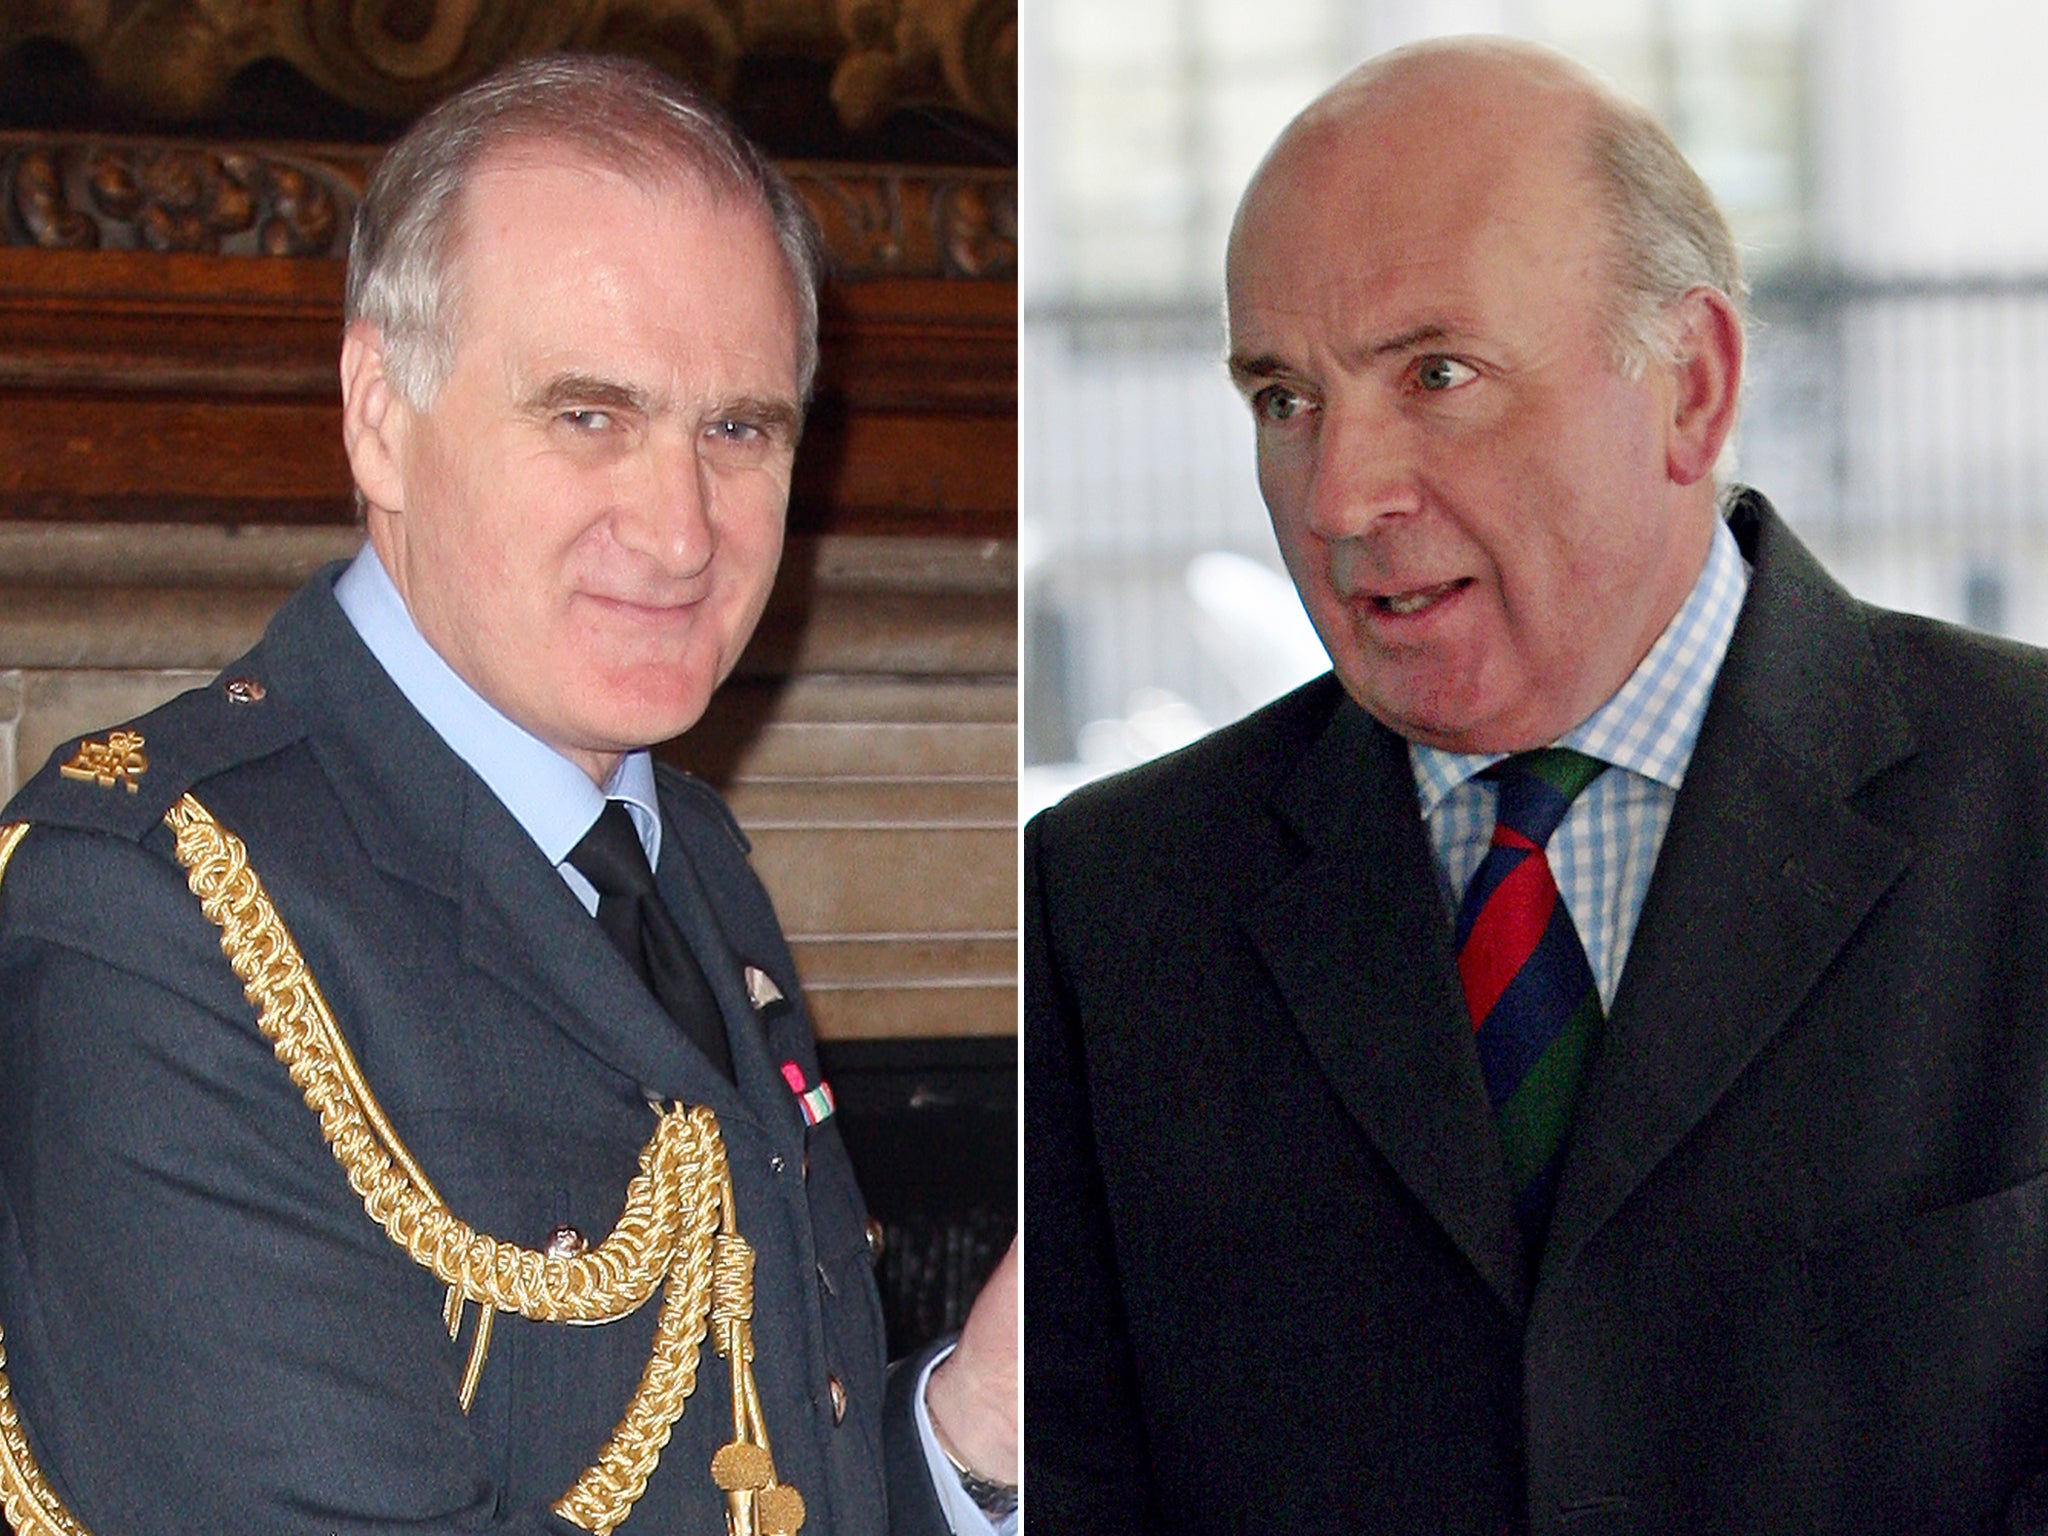 Lord Stirrup, left, and Lord Dannatt, right, were cleared of breaking House of Lords rules